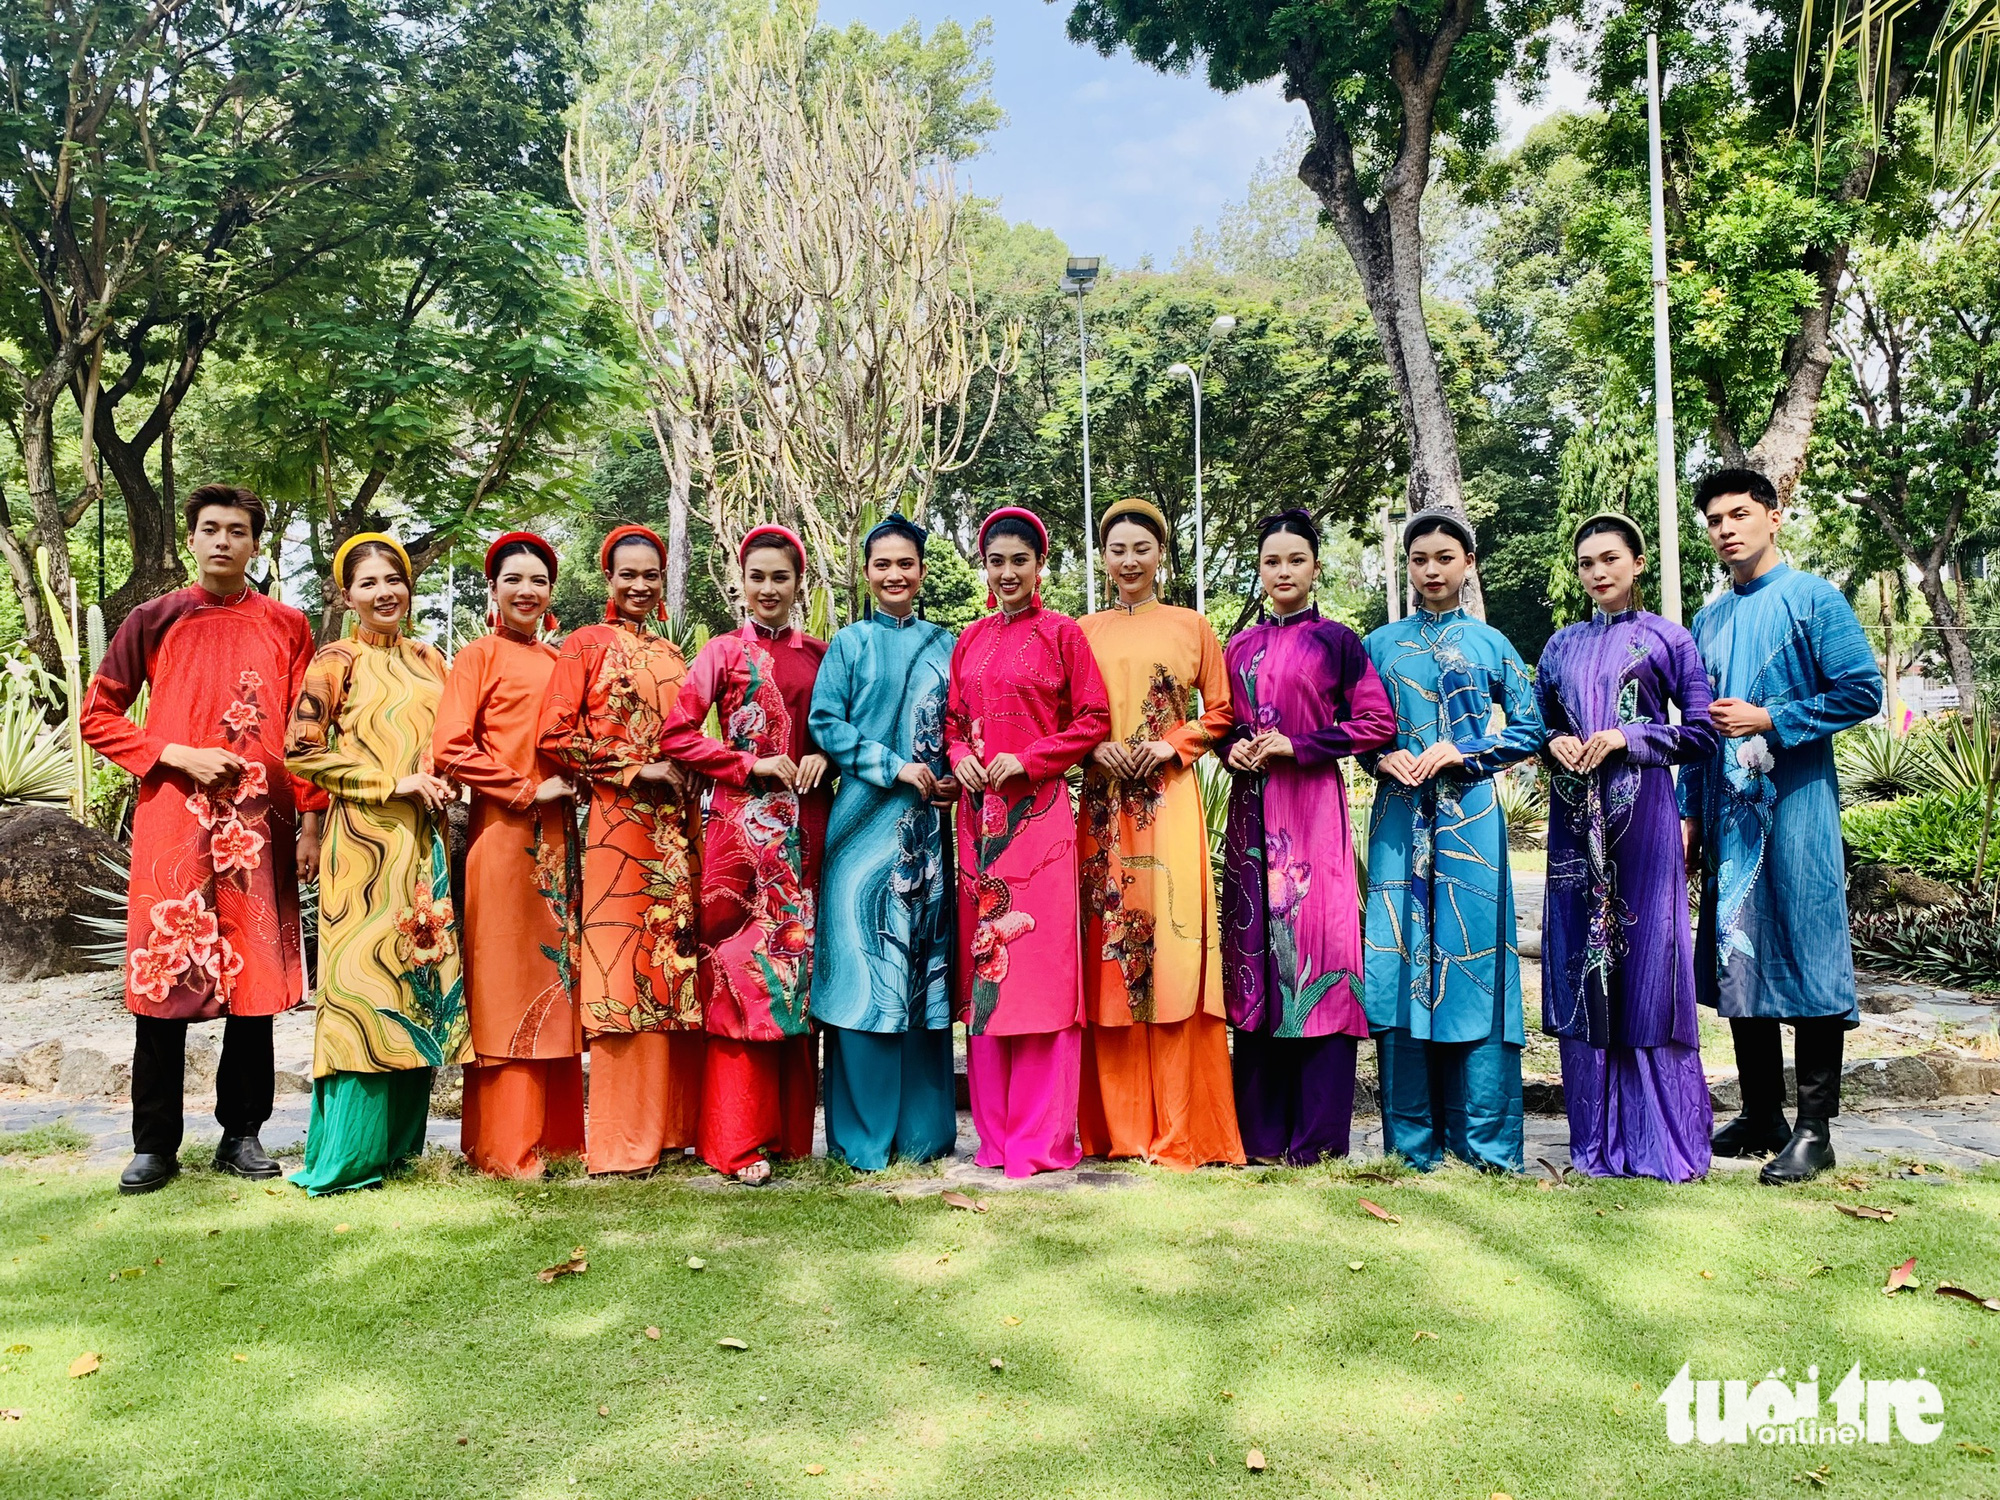 A collection of orchid-inspired ao dai was introduced at the second orchid festival at Tao Dan Park in downtown Ho Chi Minh City. Photo: Hoai Phuong / Tuoi Tre